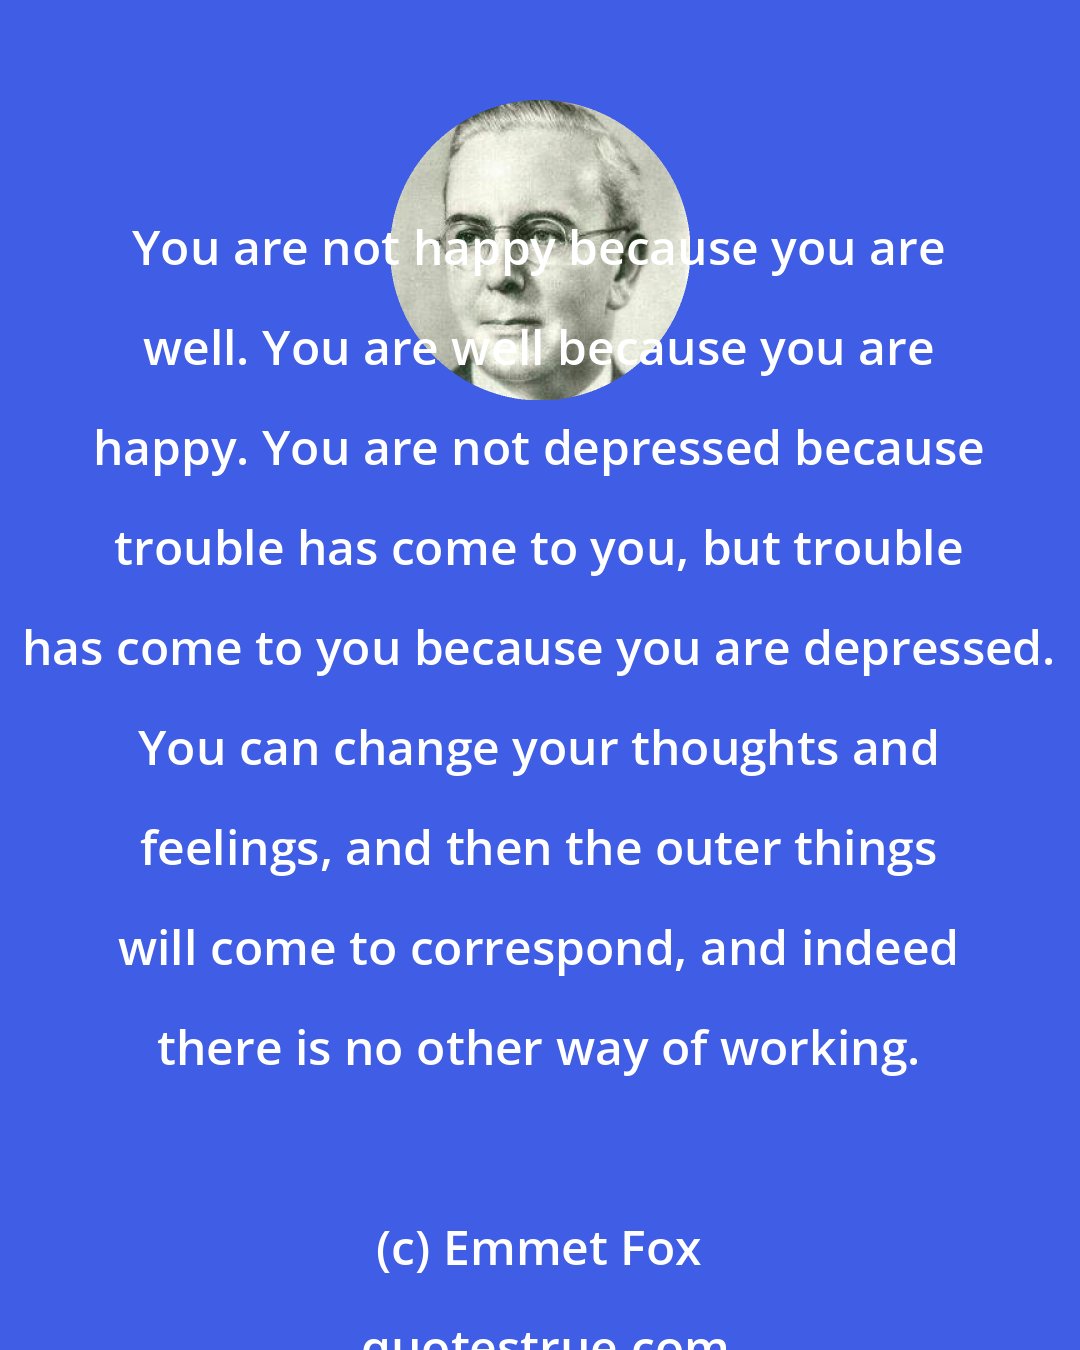 Emmet Fox: You are not happy because you are well. You are well because you are happy. You are not depressed because trouble has come to you, but trouble has come to you because you are depressed. You can change your thoughts and feelings, and then the outer things will come to correspond, and indeed there is no other way of working.